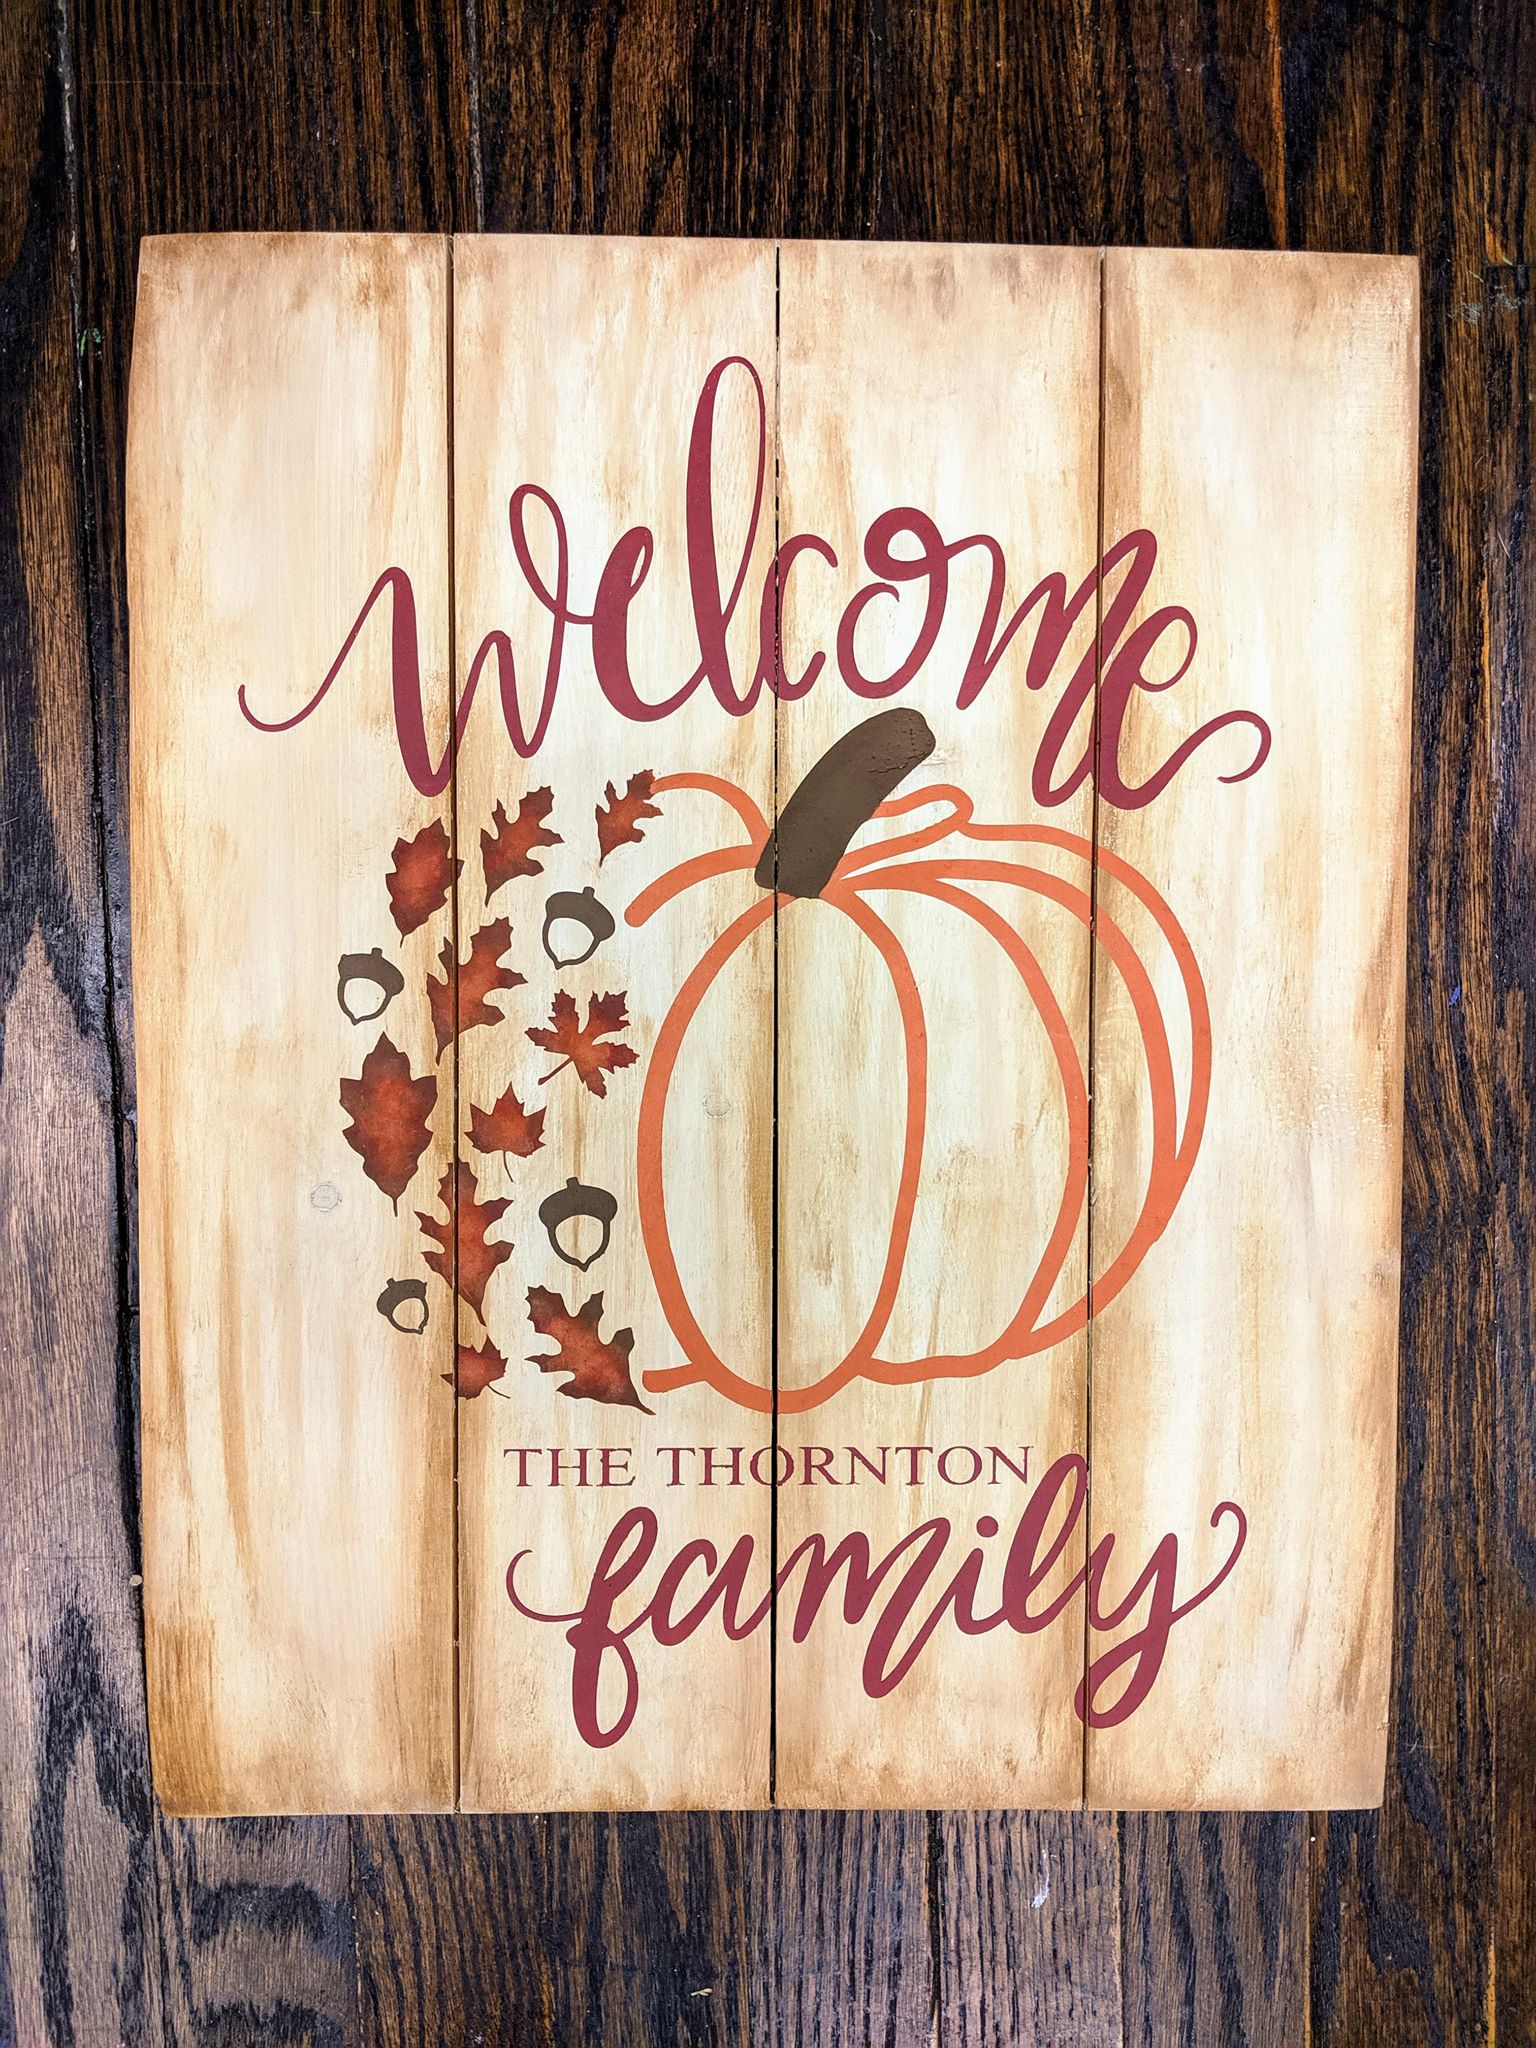 Welcome with family name - Pumpkin acorns and leaves 14x17